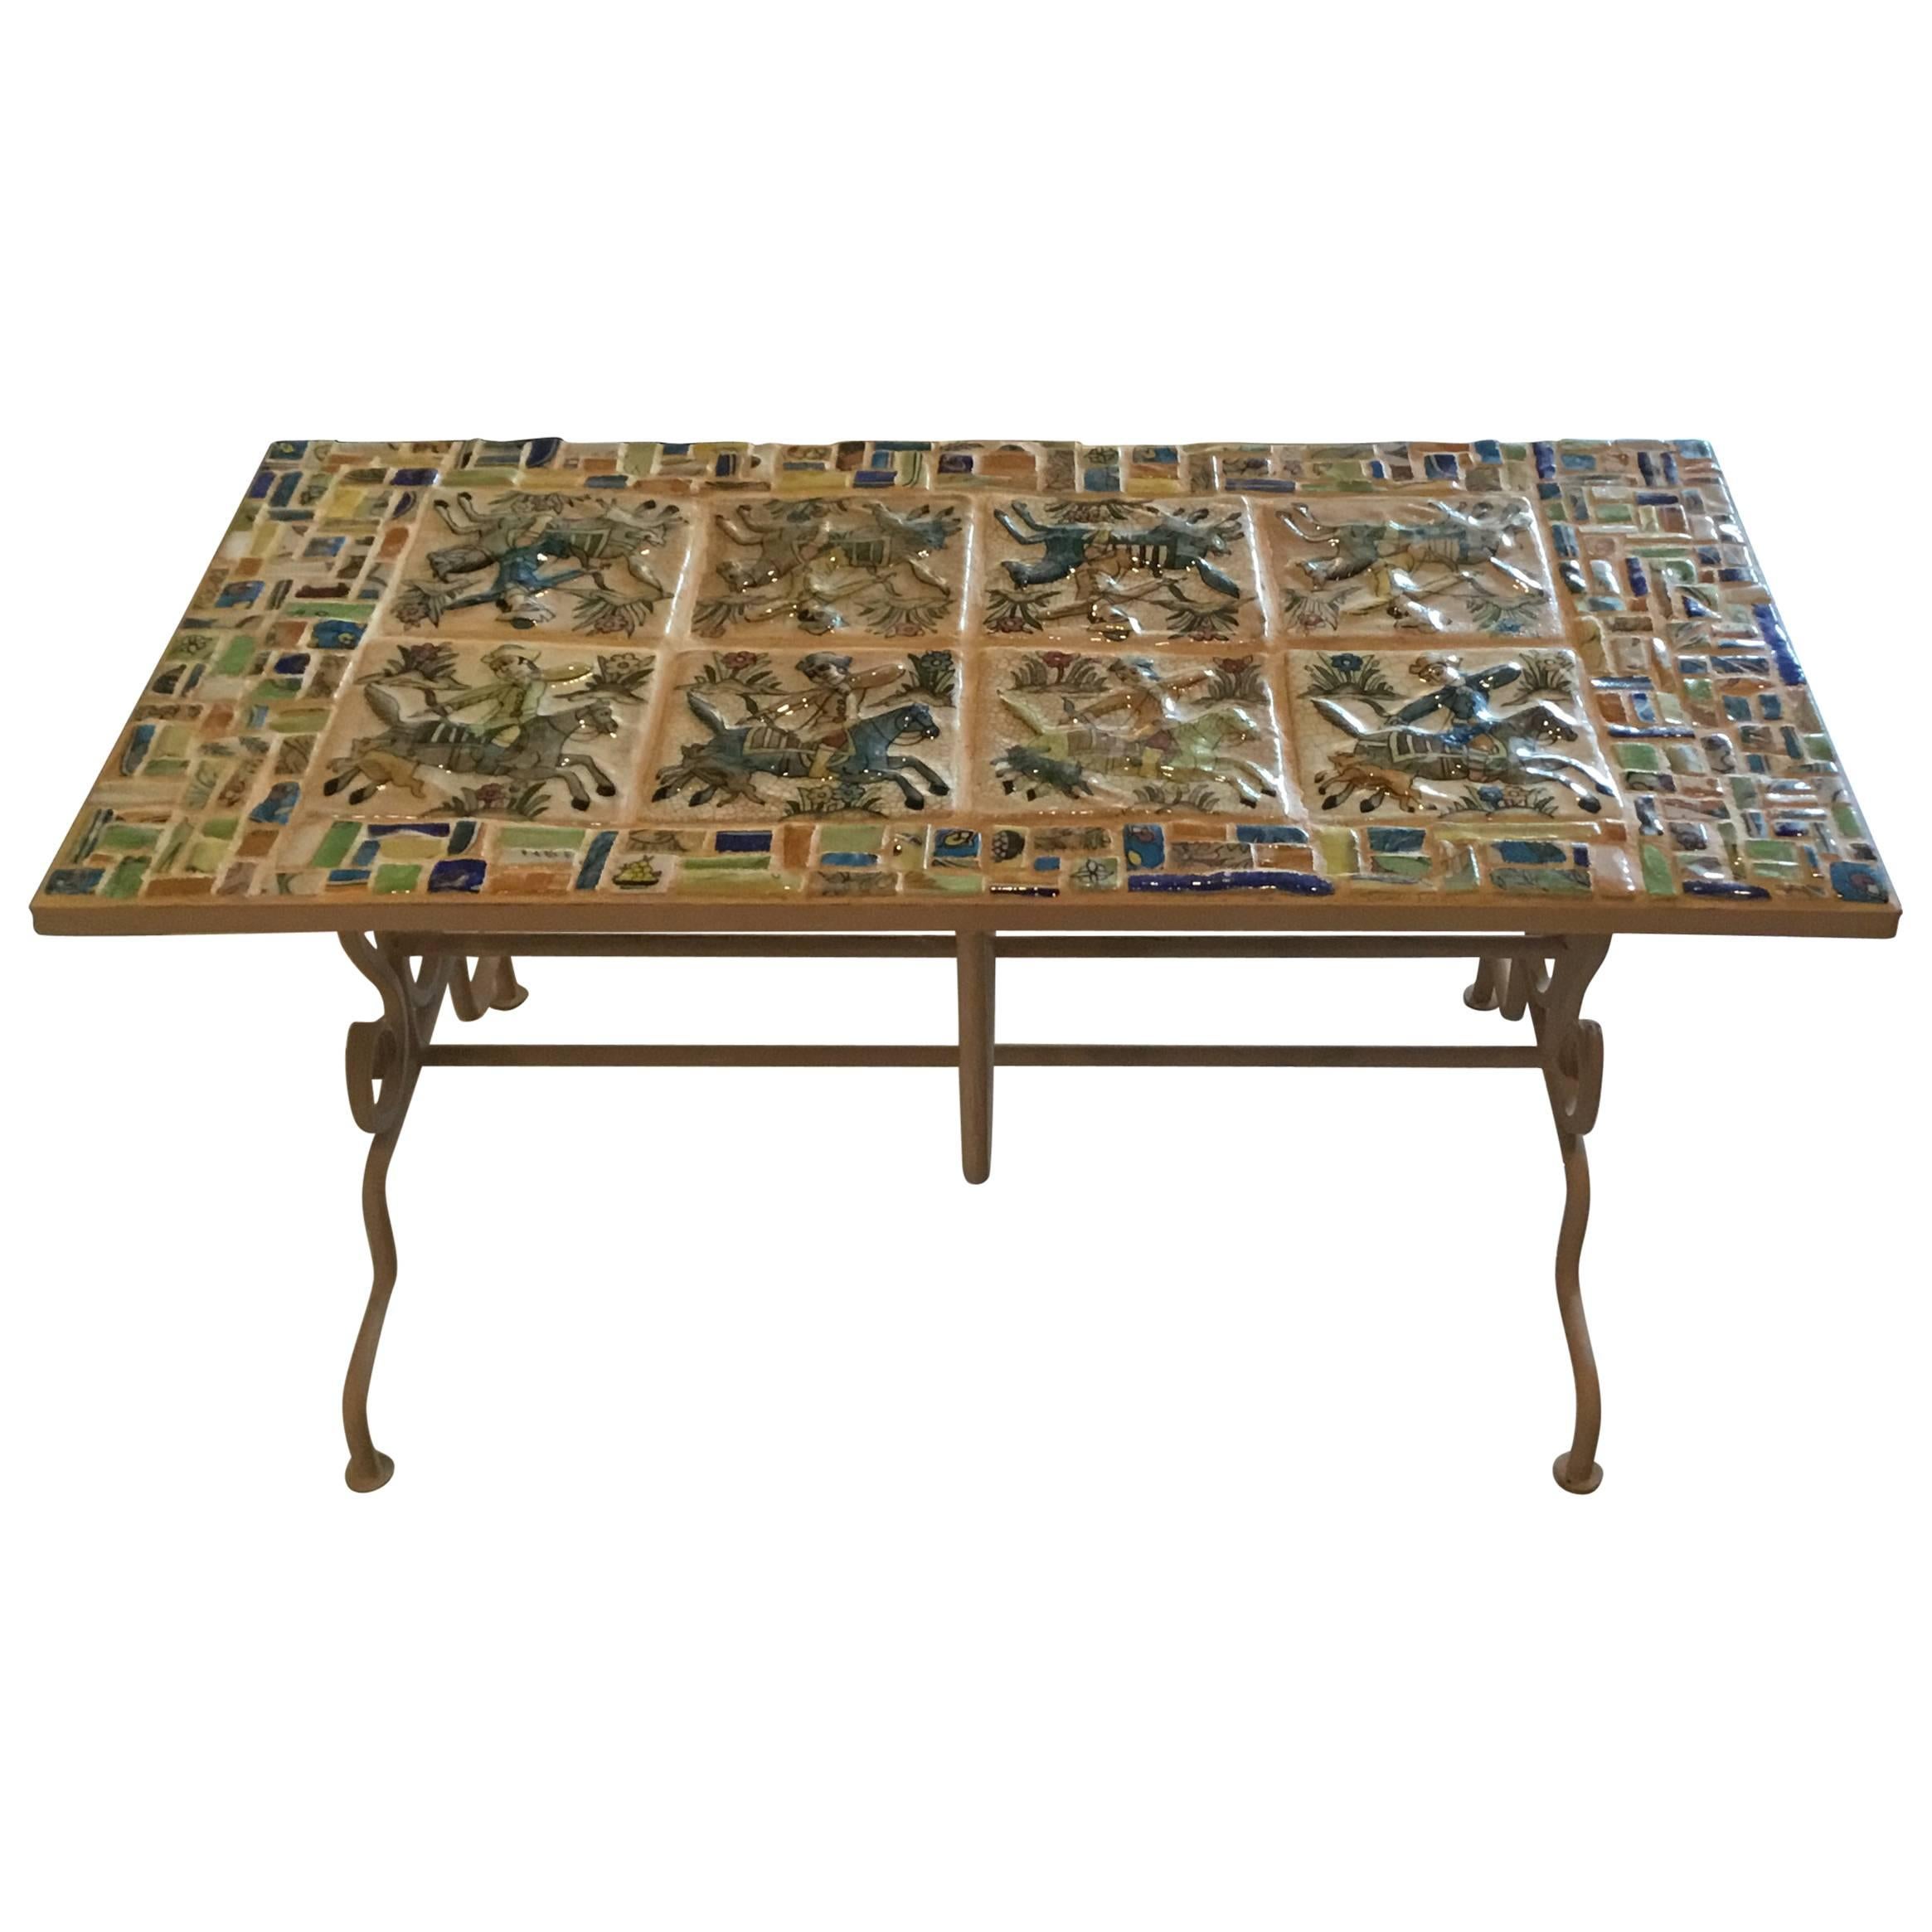 One of a Kind Persian Tile Coffee Table For Sale